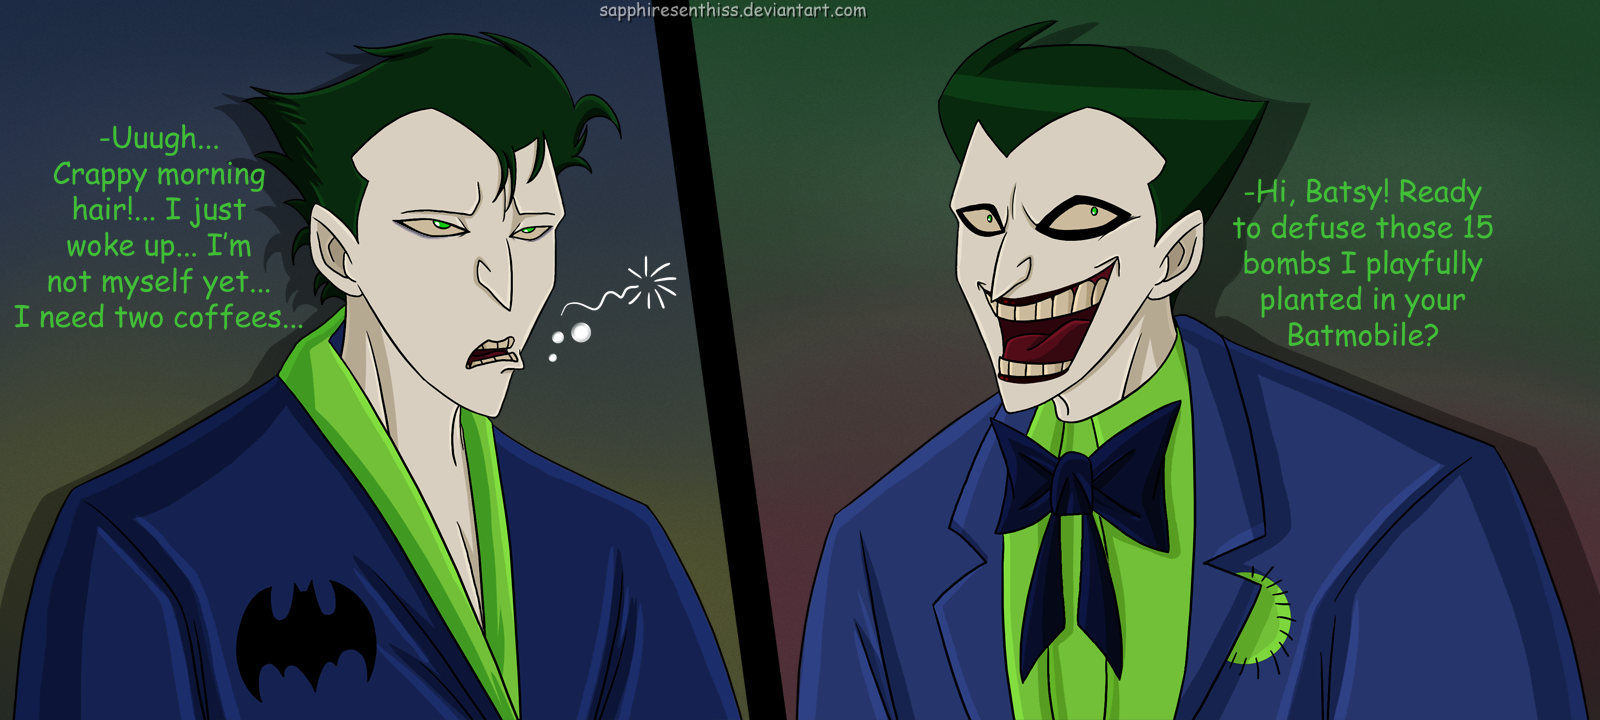 Two Different Jokers XD by Sapphiresenthiss on DeviantArt